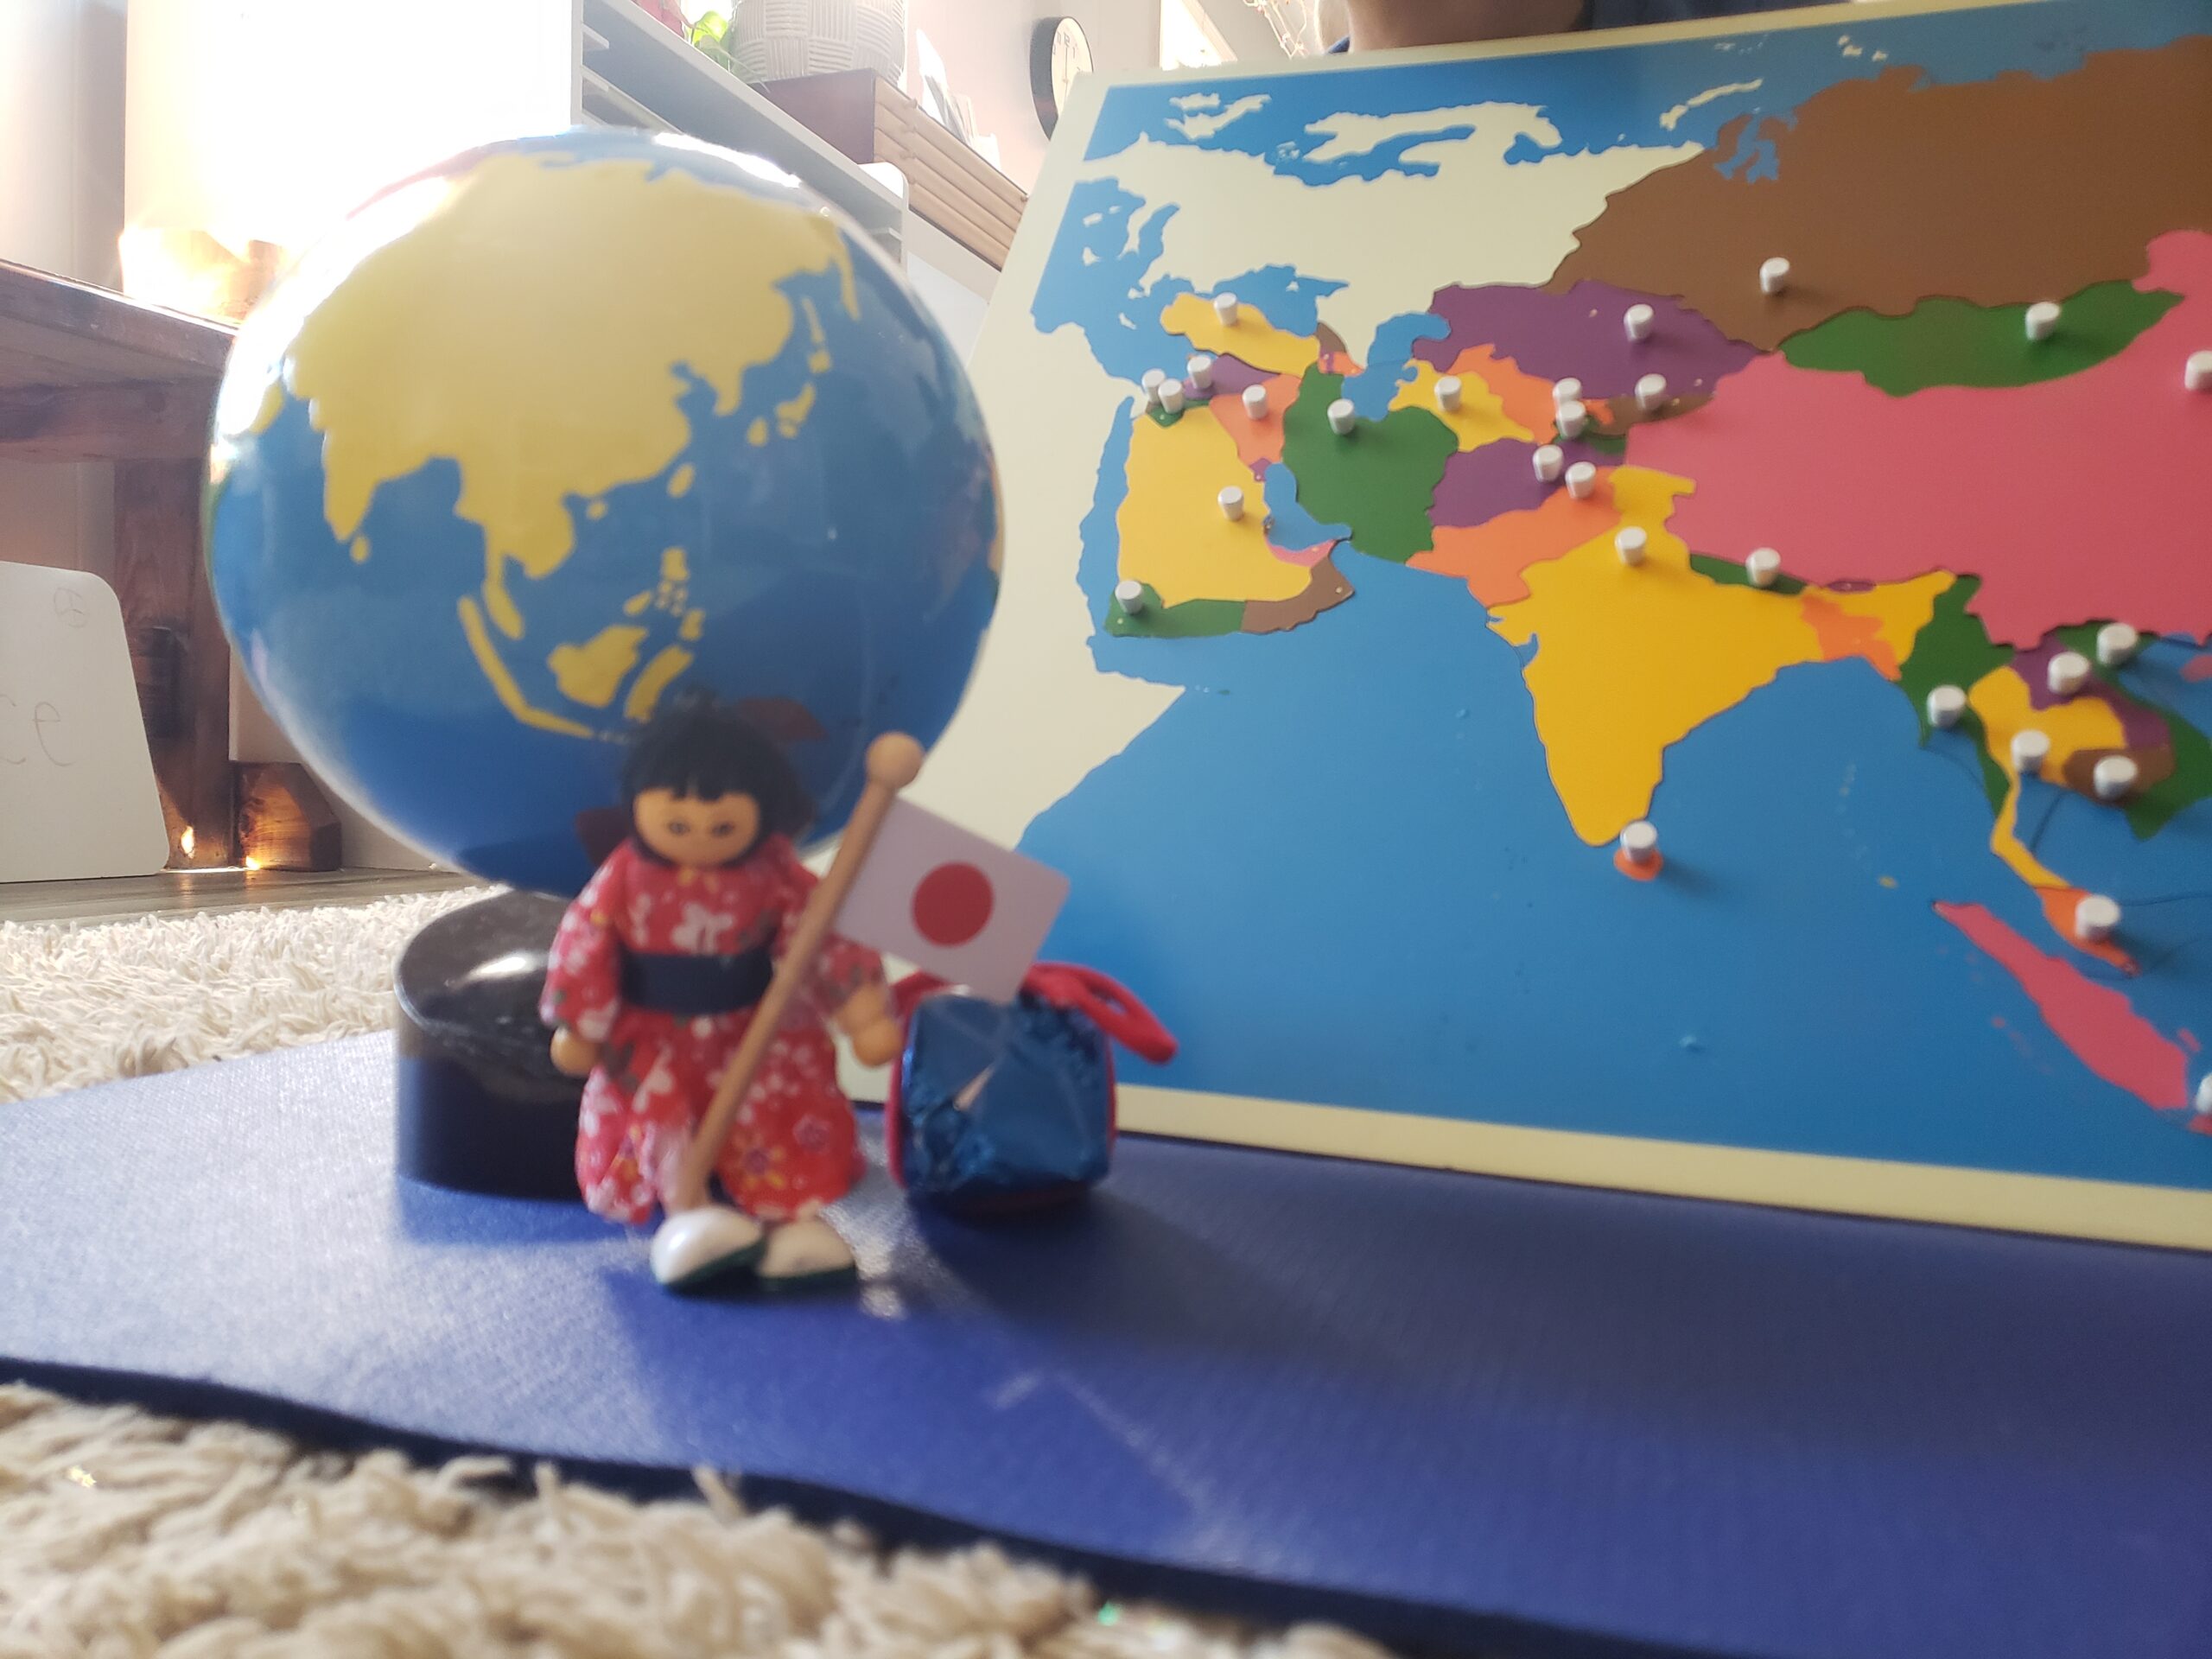 A toy doll Japanese woman and a globe